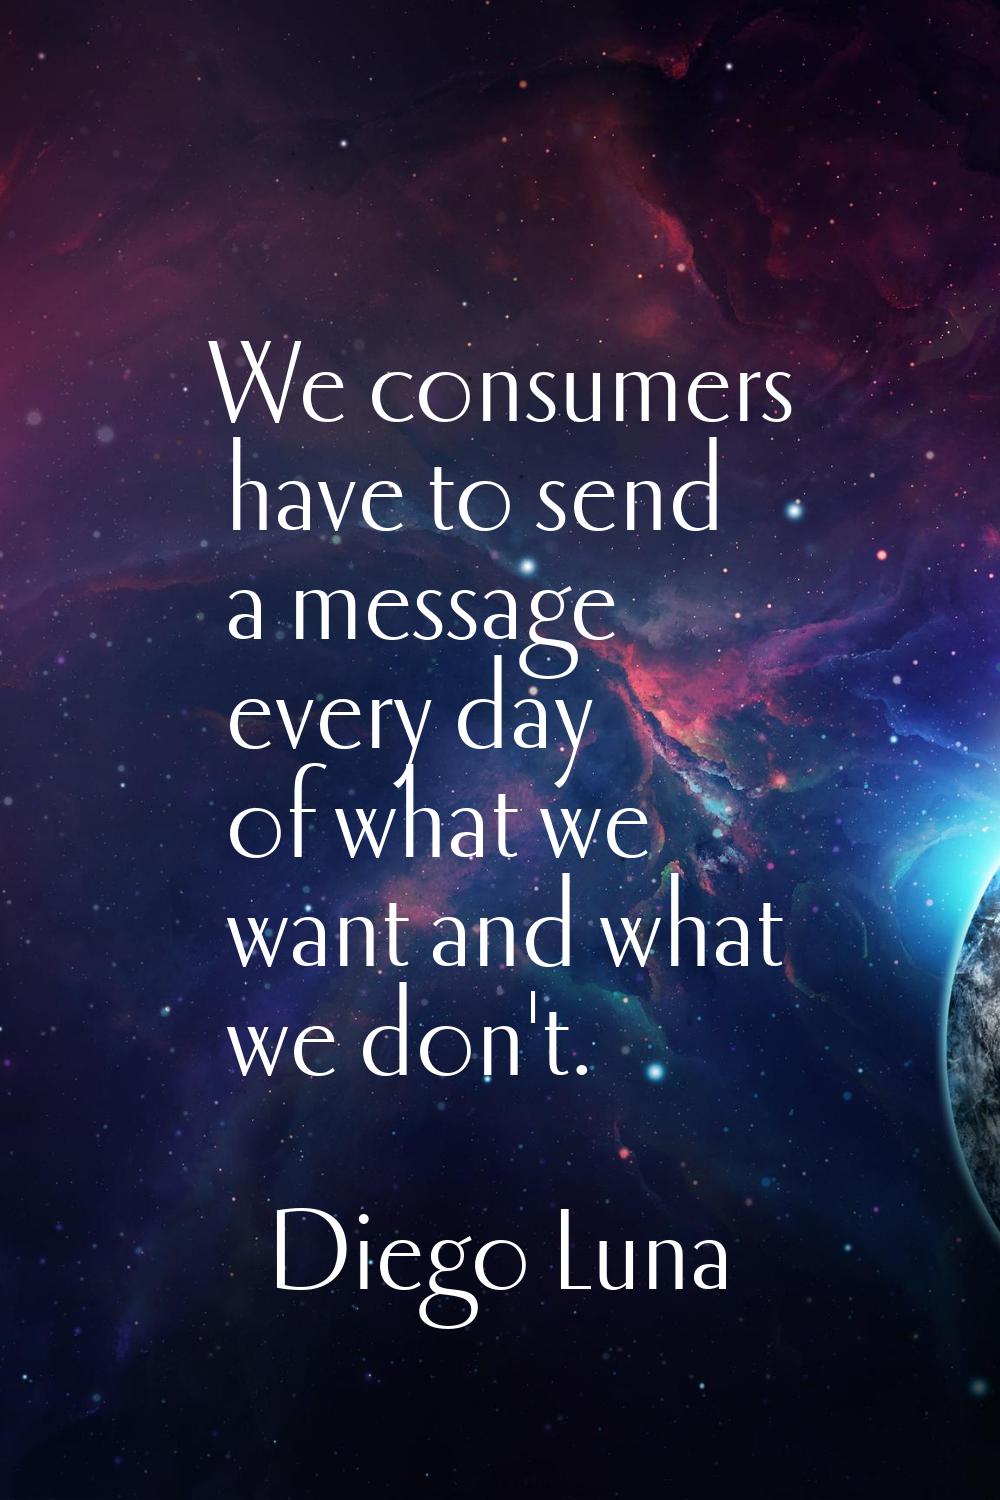 We consumers have to send a message every day of what we want and what we don't.